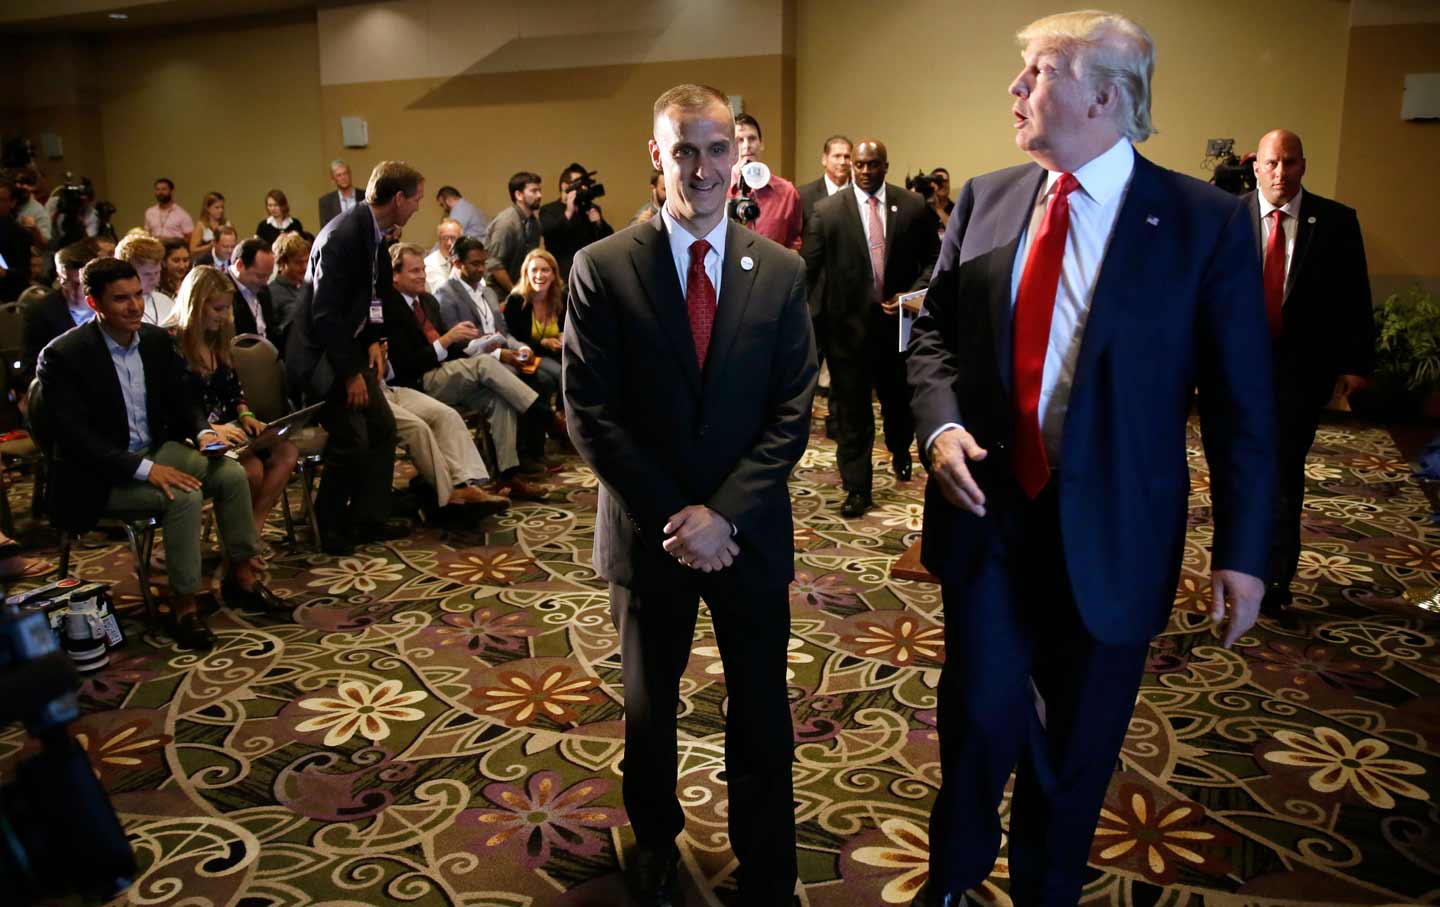 Did Trump’s Campaign Manager Assault a Female Reporter?